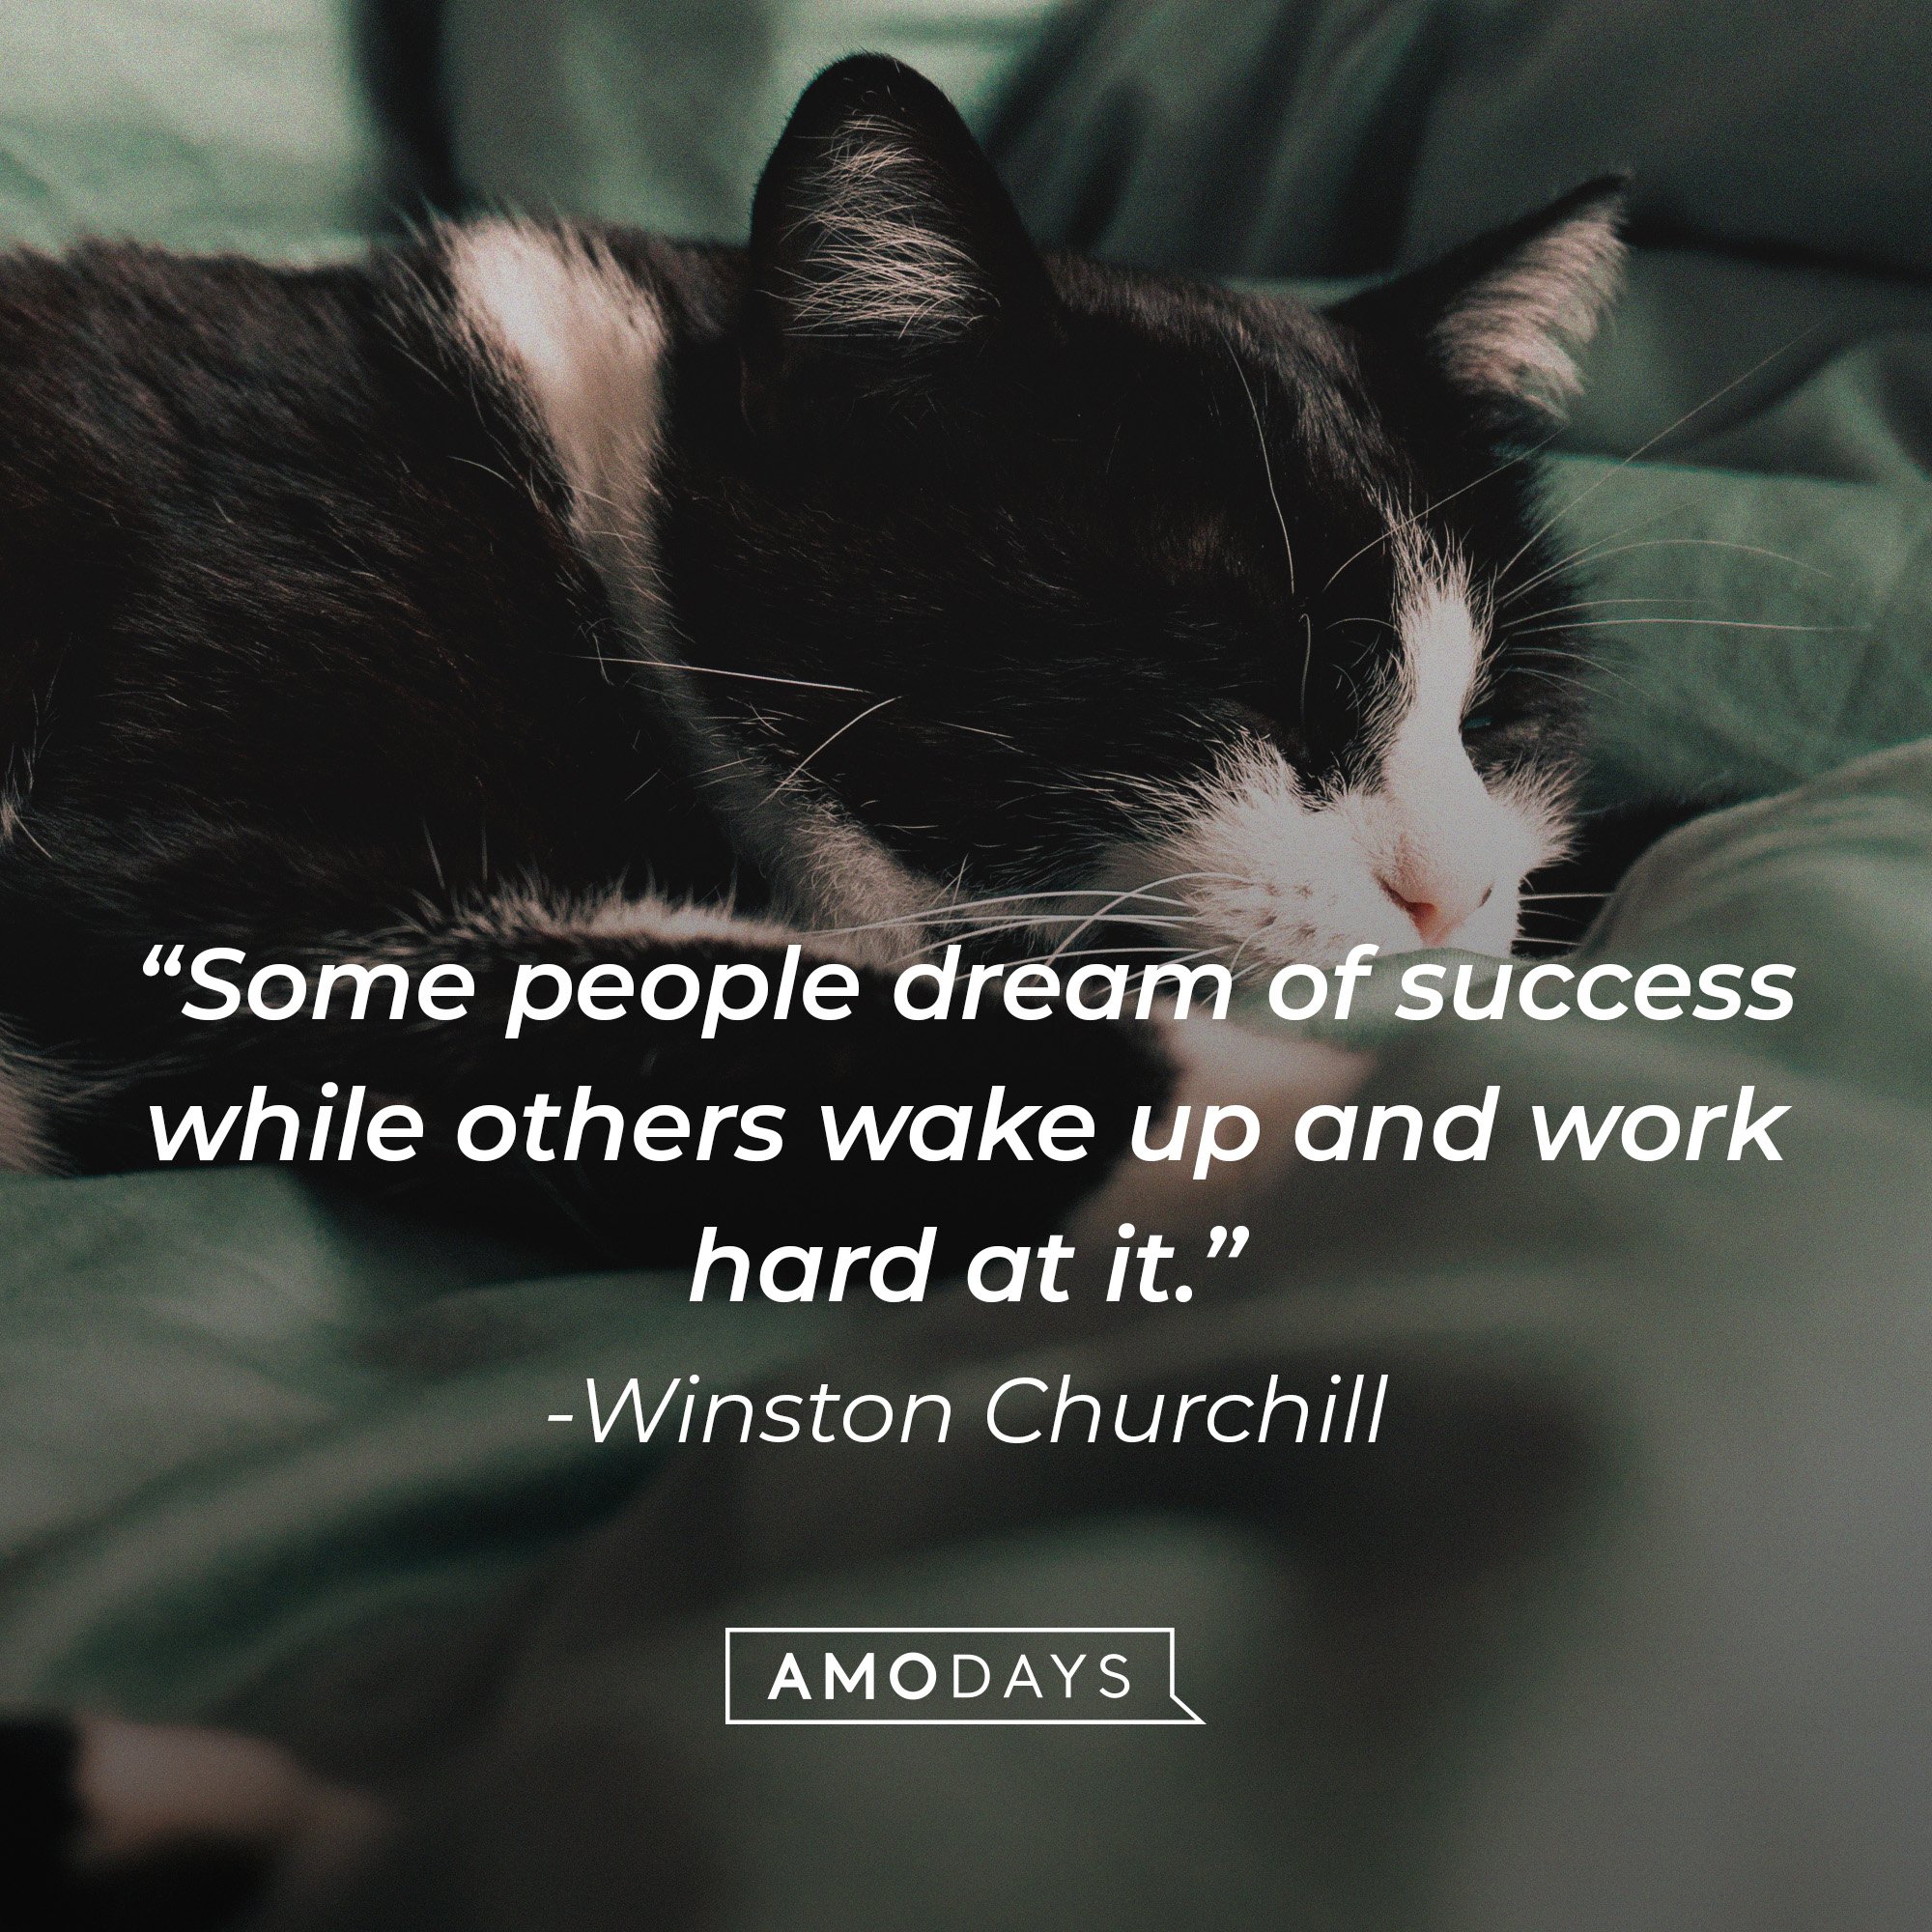 Winston Churchill's quote: “Some people dream of success while others wake up and work hard at it.” | Image: AmoDays 